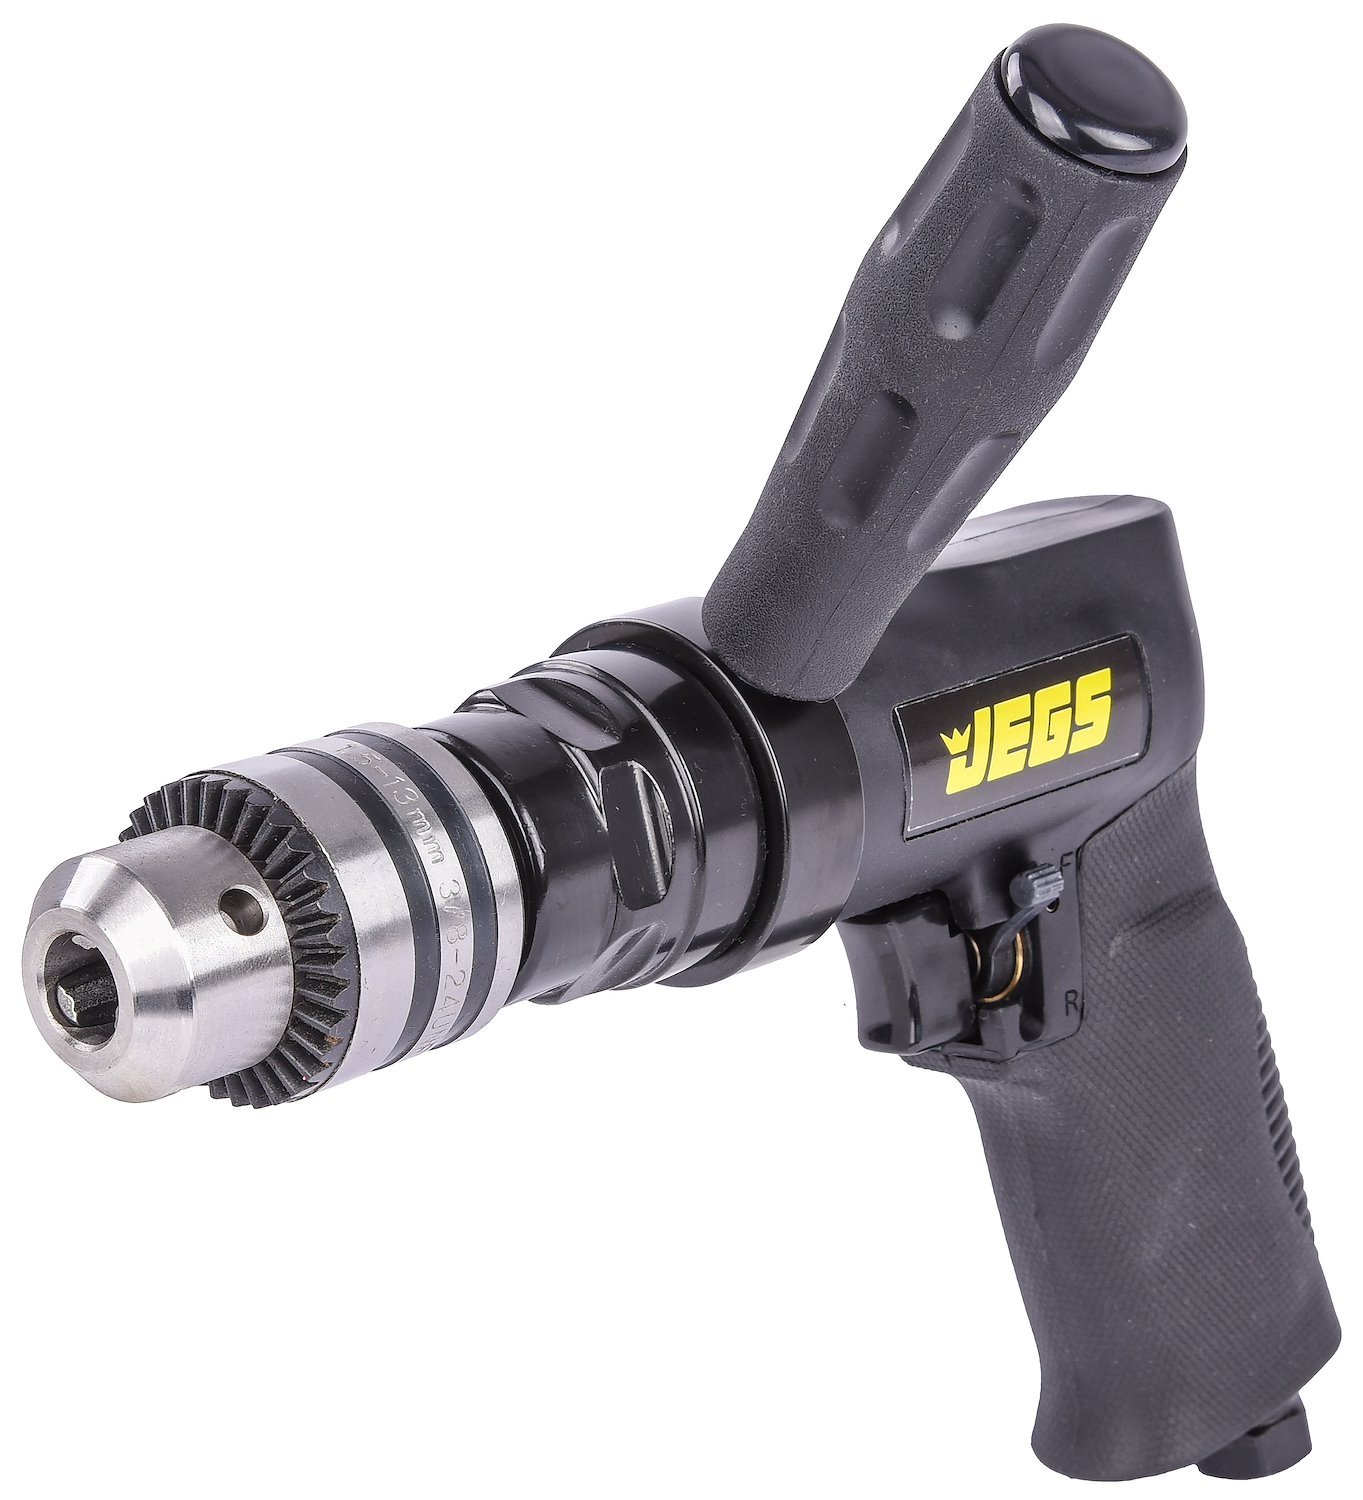 Reversible Air Drill [1/2 in. Chuck, 700 RPM]